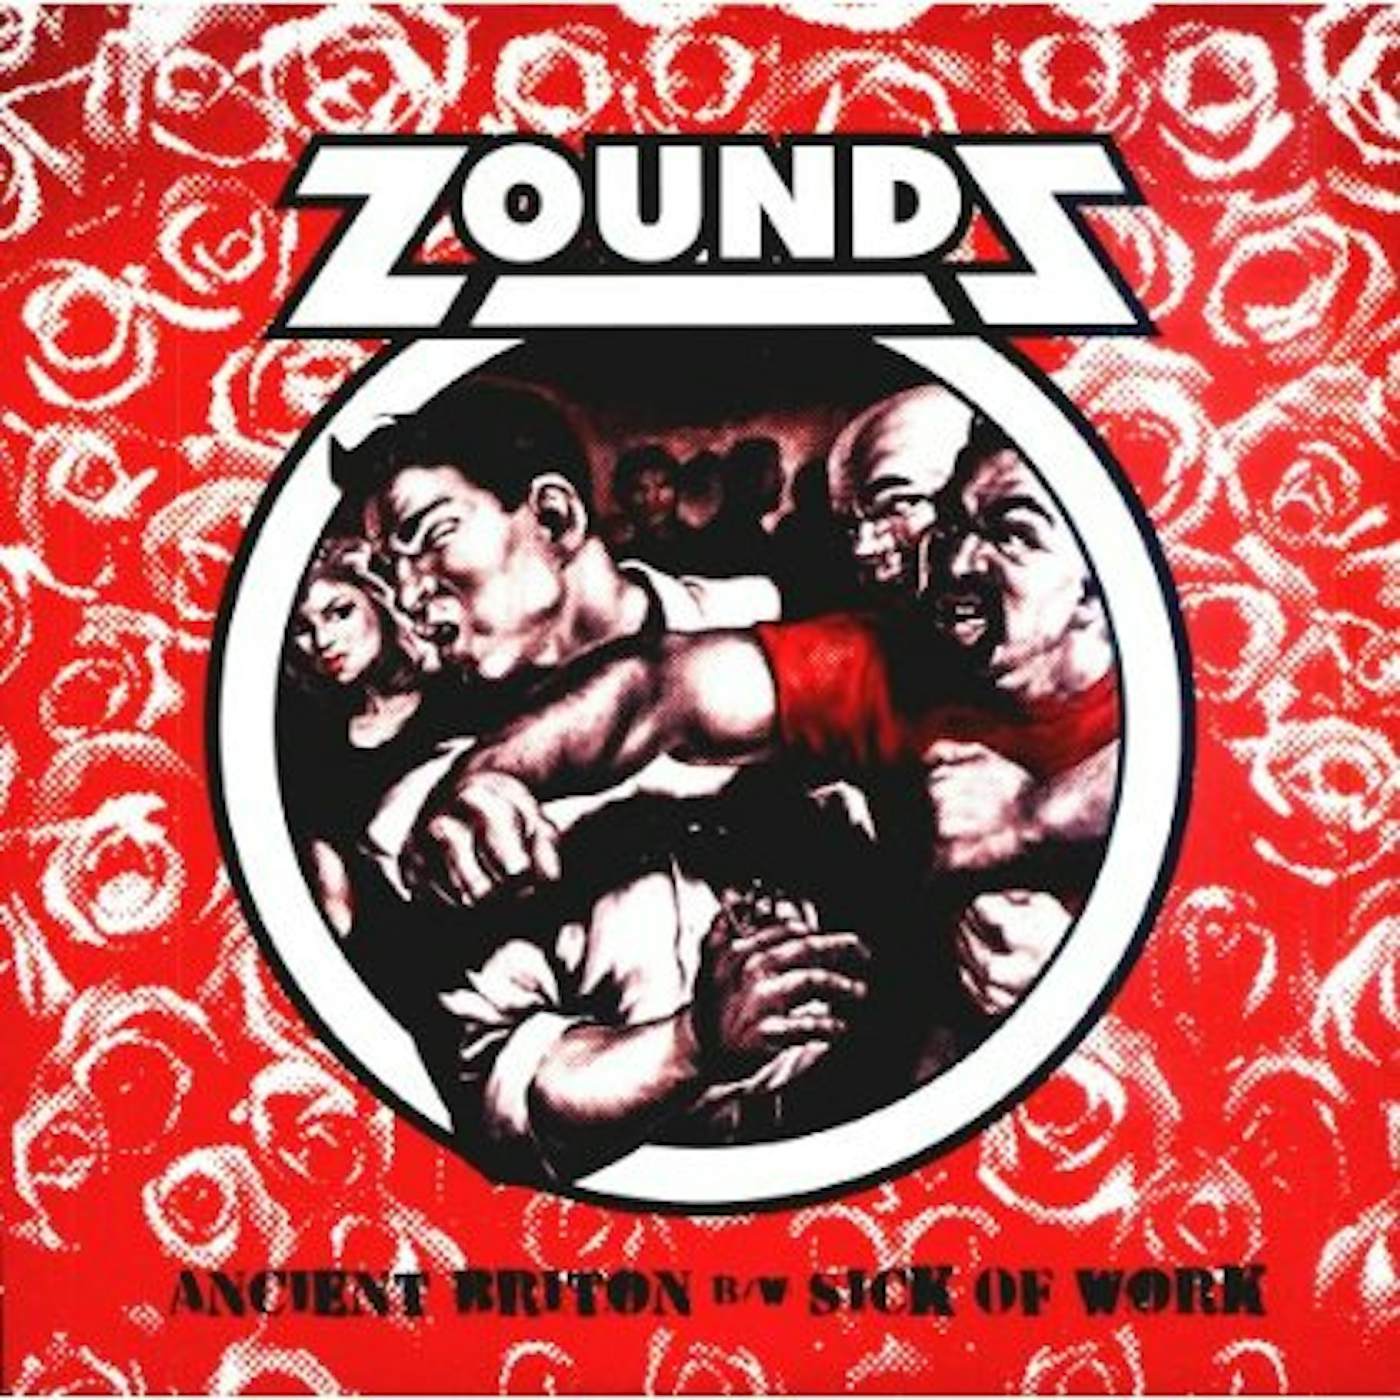 Zounds ANCIENT BRITON/SICK OF WORK Vinyl Record - UK Release